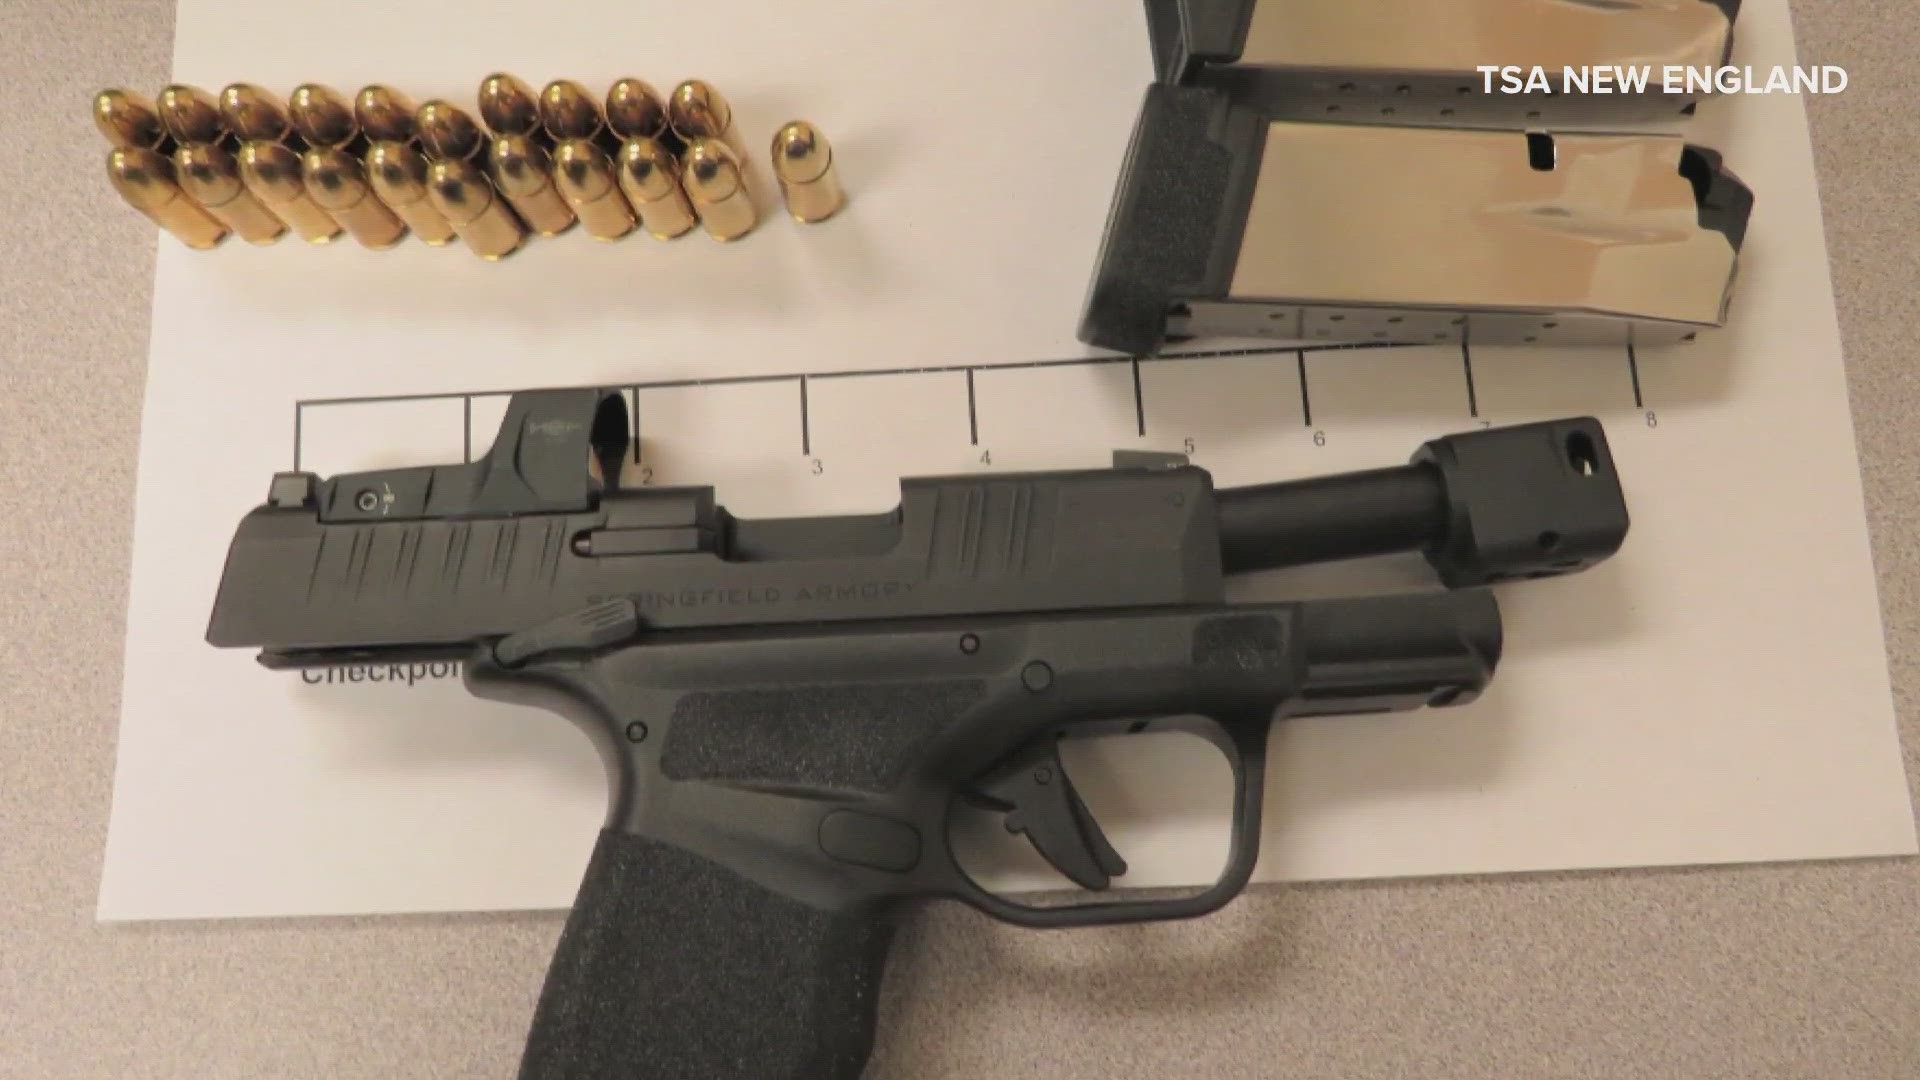 During questioning, the North Carolina resident stated that he meant to leave the firearm in his vehicle but forgot because he was in a rush, TSA said.